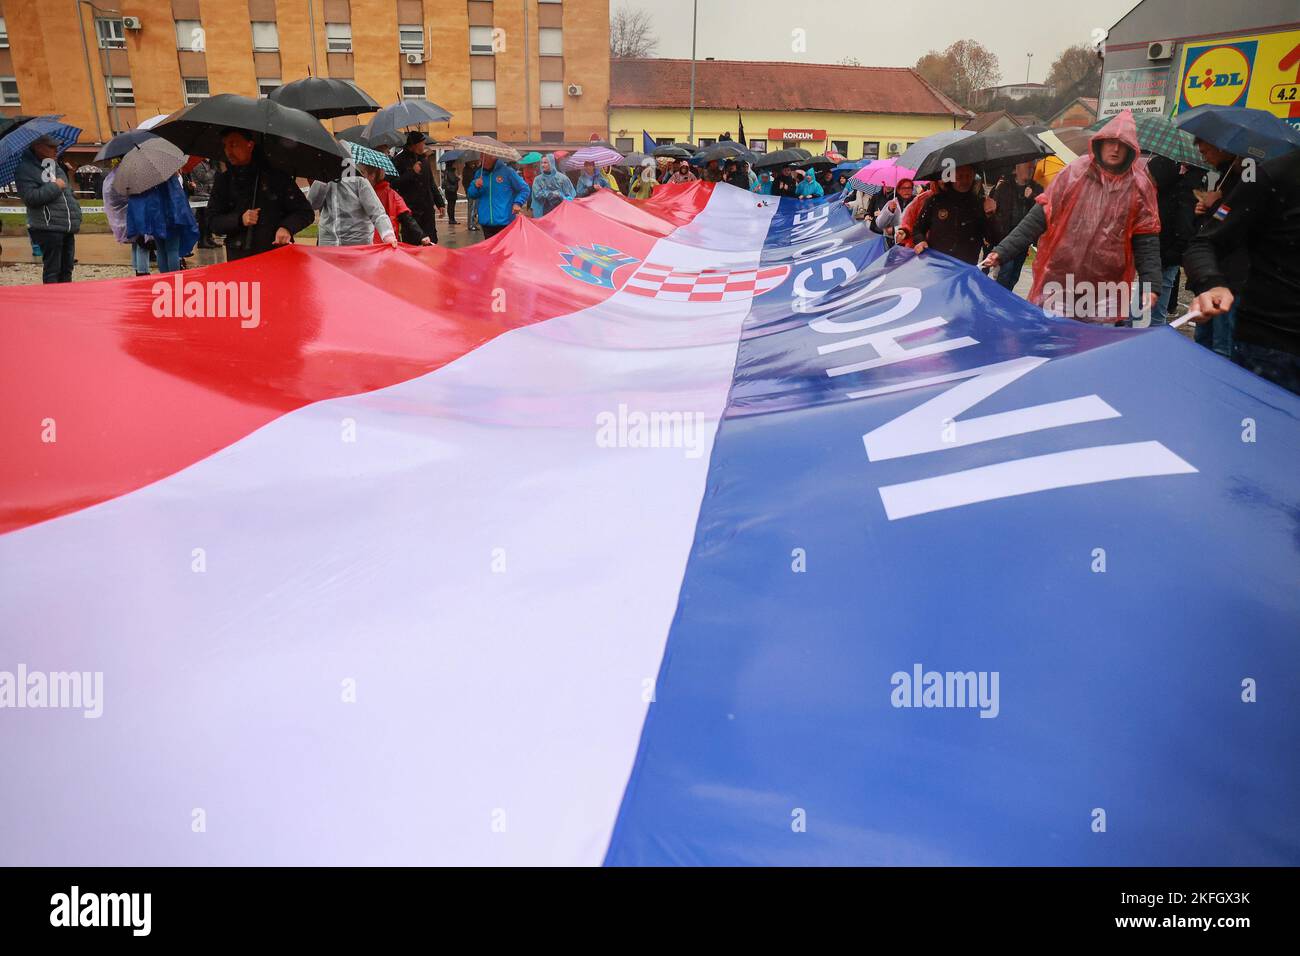 Participants of the Remembrance Day program in Vukovar, Croatia on Nov. 18, 2022. Today marks the 31st anniversary of the Day of Remembrance of the Victims of Vukovar and Skabrnja in Croatia. The Battle of Vukovar was the largest battle in the Homeland War, which lasted from 1991 to 1995. It was an 87-day siege of the Croatian city of Vukovar by the Yugoslav People's Army, with the help of Serb paramilitary forces from August to November 1991 during the Homeland War. The battle ended with the destruction of Vukovar and numerous murders and persecution of the Croatian population. Photo: Davor J Stock Photo